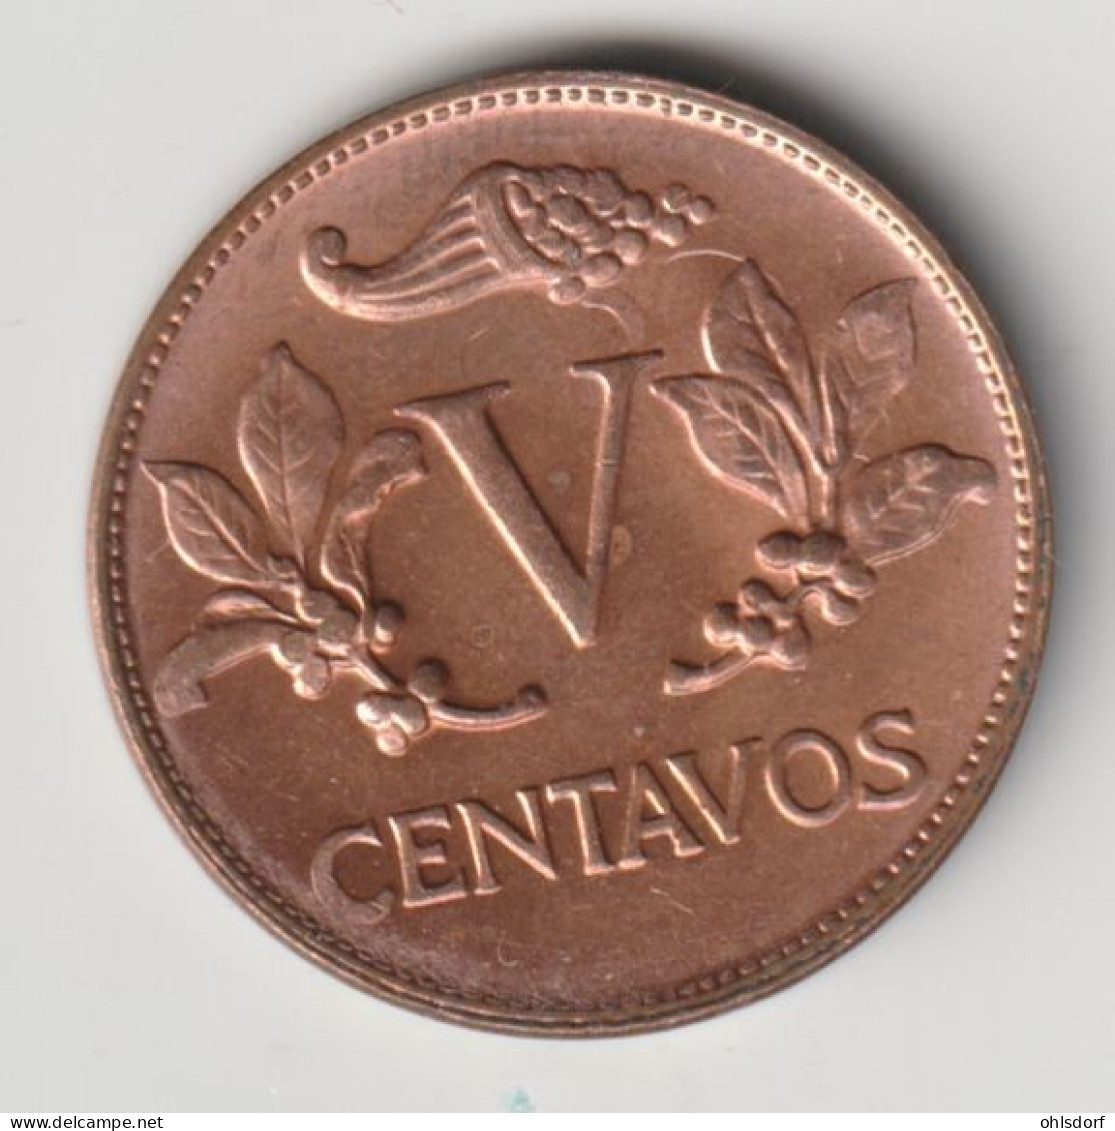 COLOMBIA 1970: 5 Centavos, KM 206a - Colombia